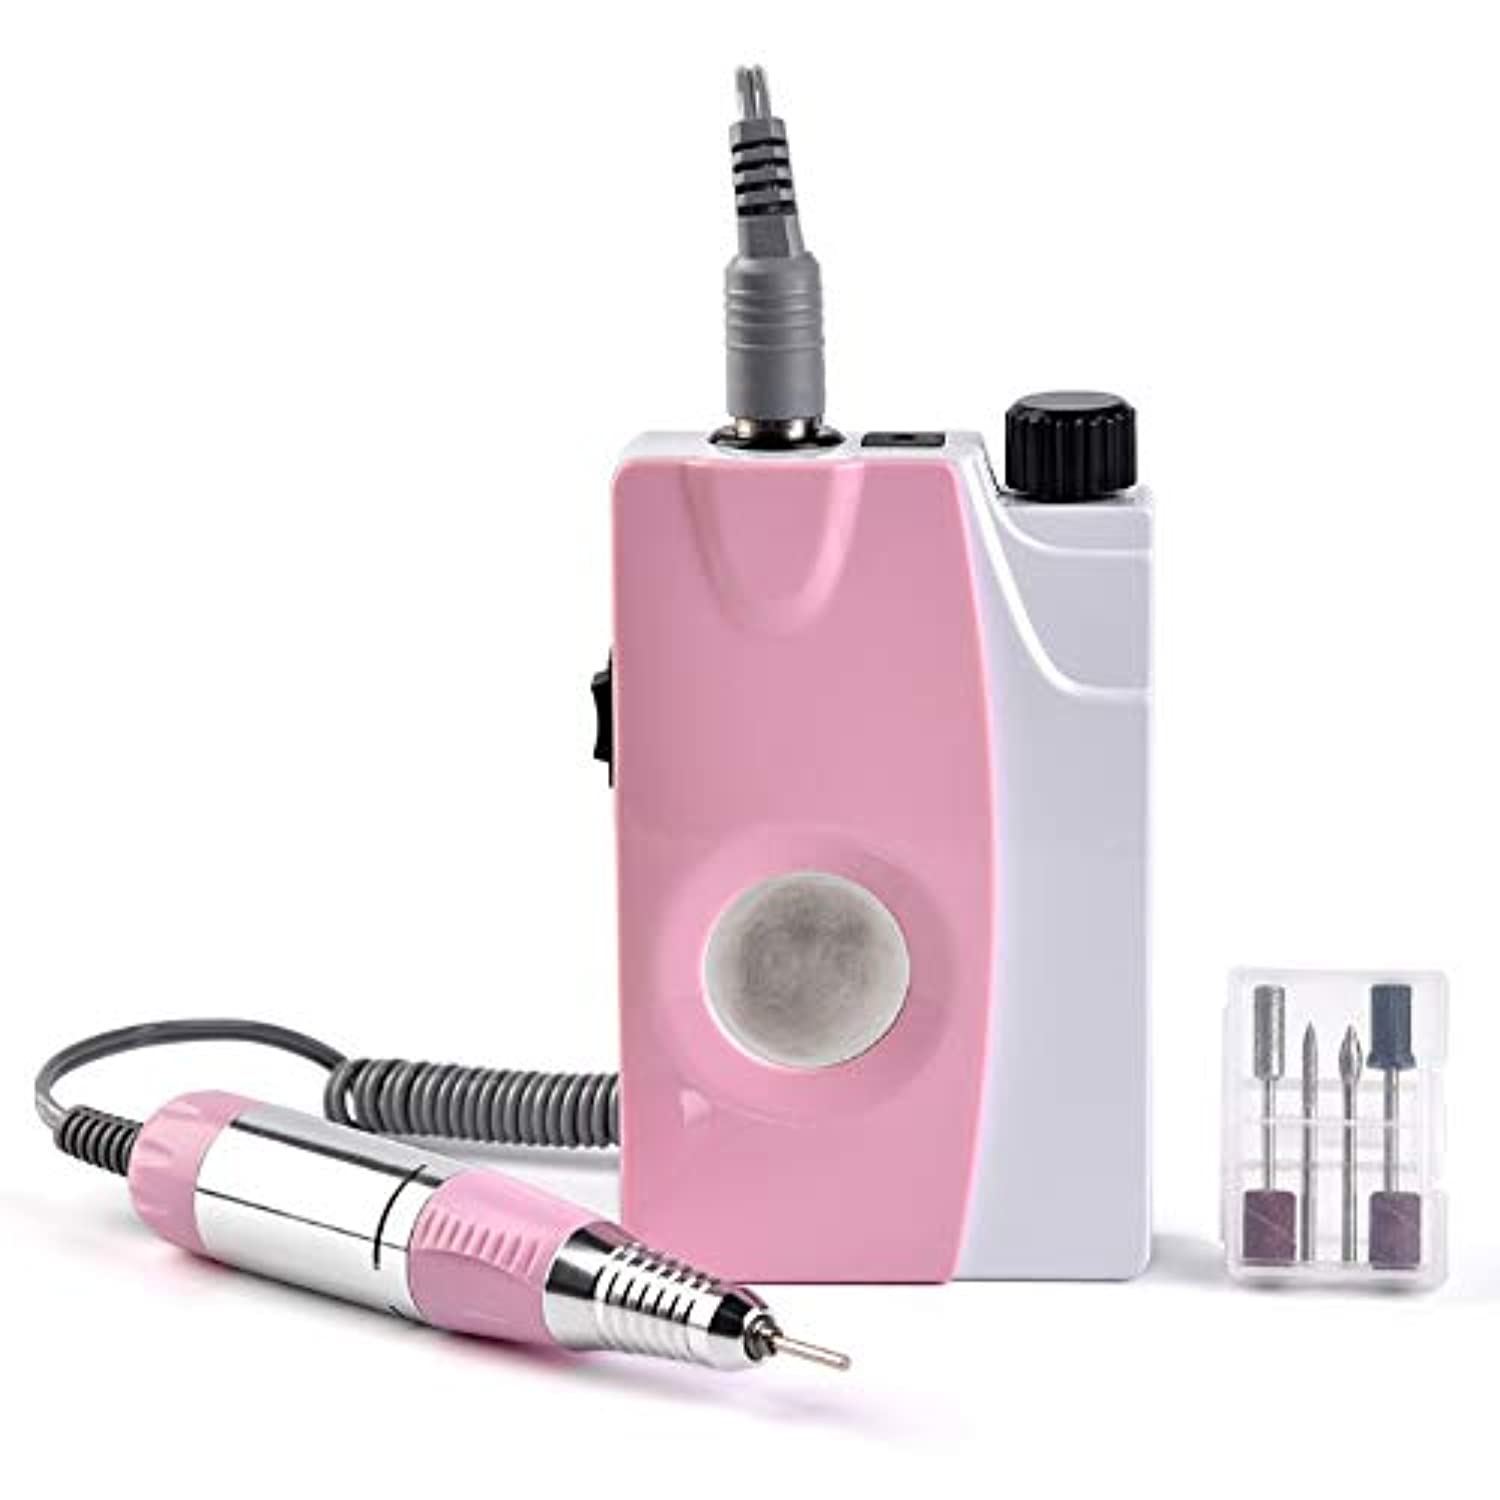 KADS Electric Nail Art Drill File Manicure Pedicure Machine 25,000RPM Pink Machine Complete Professional Finger & Toe Nail Care Kit Suitable for 3/32